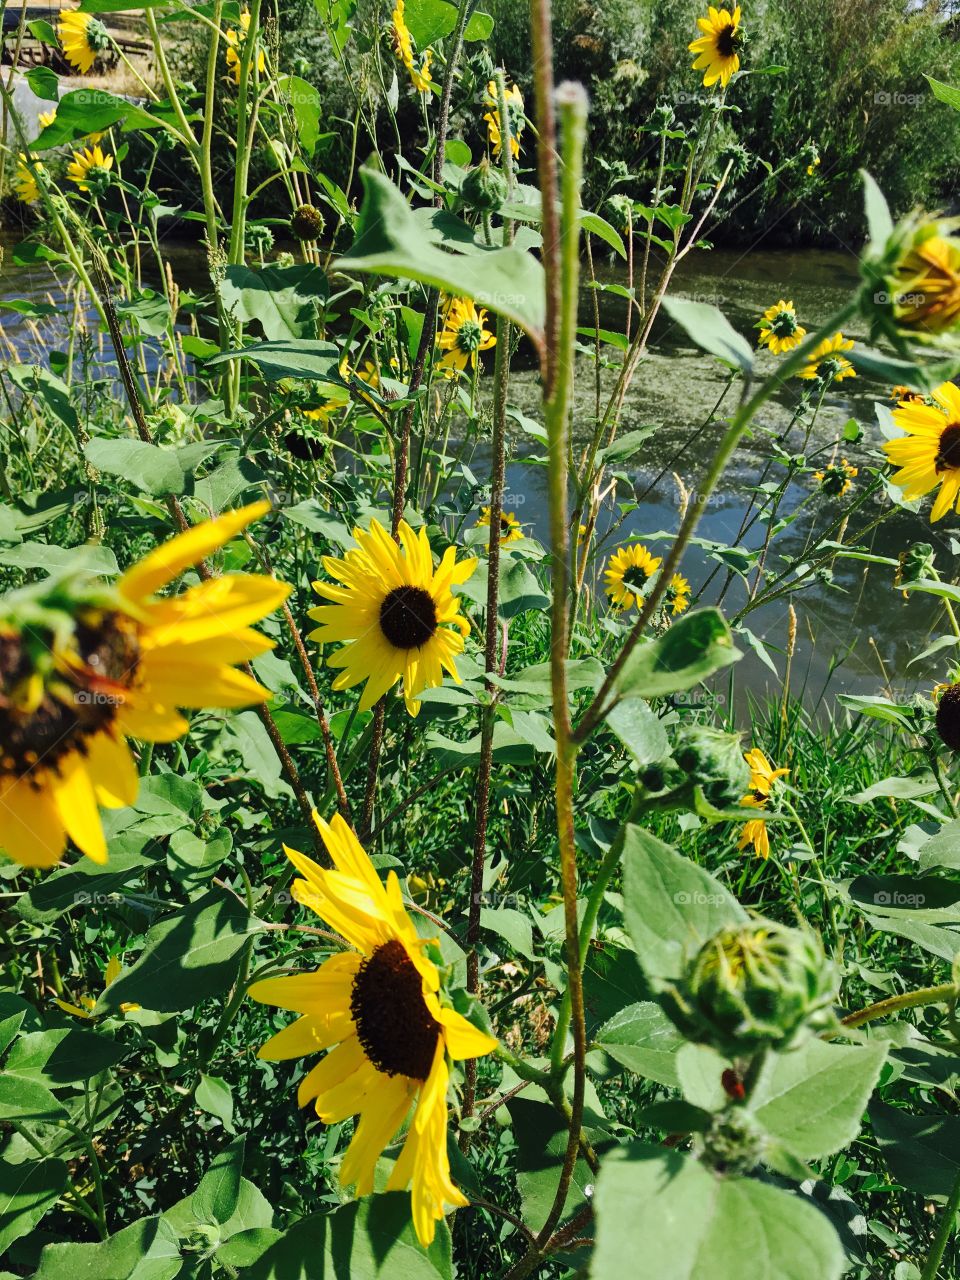 Sunflowers by the river.